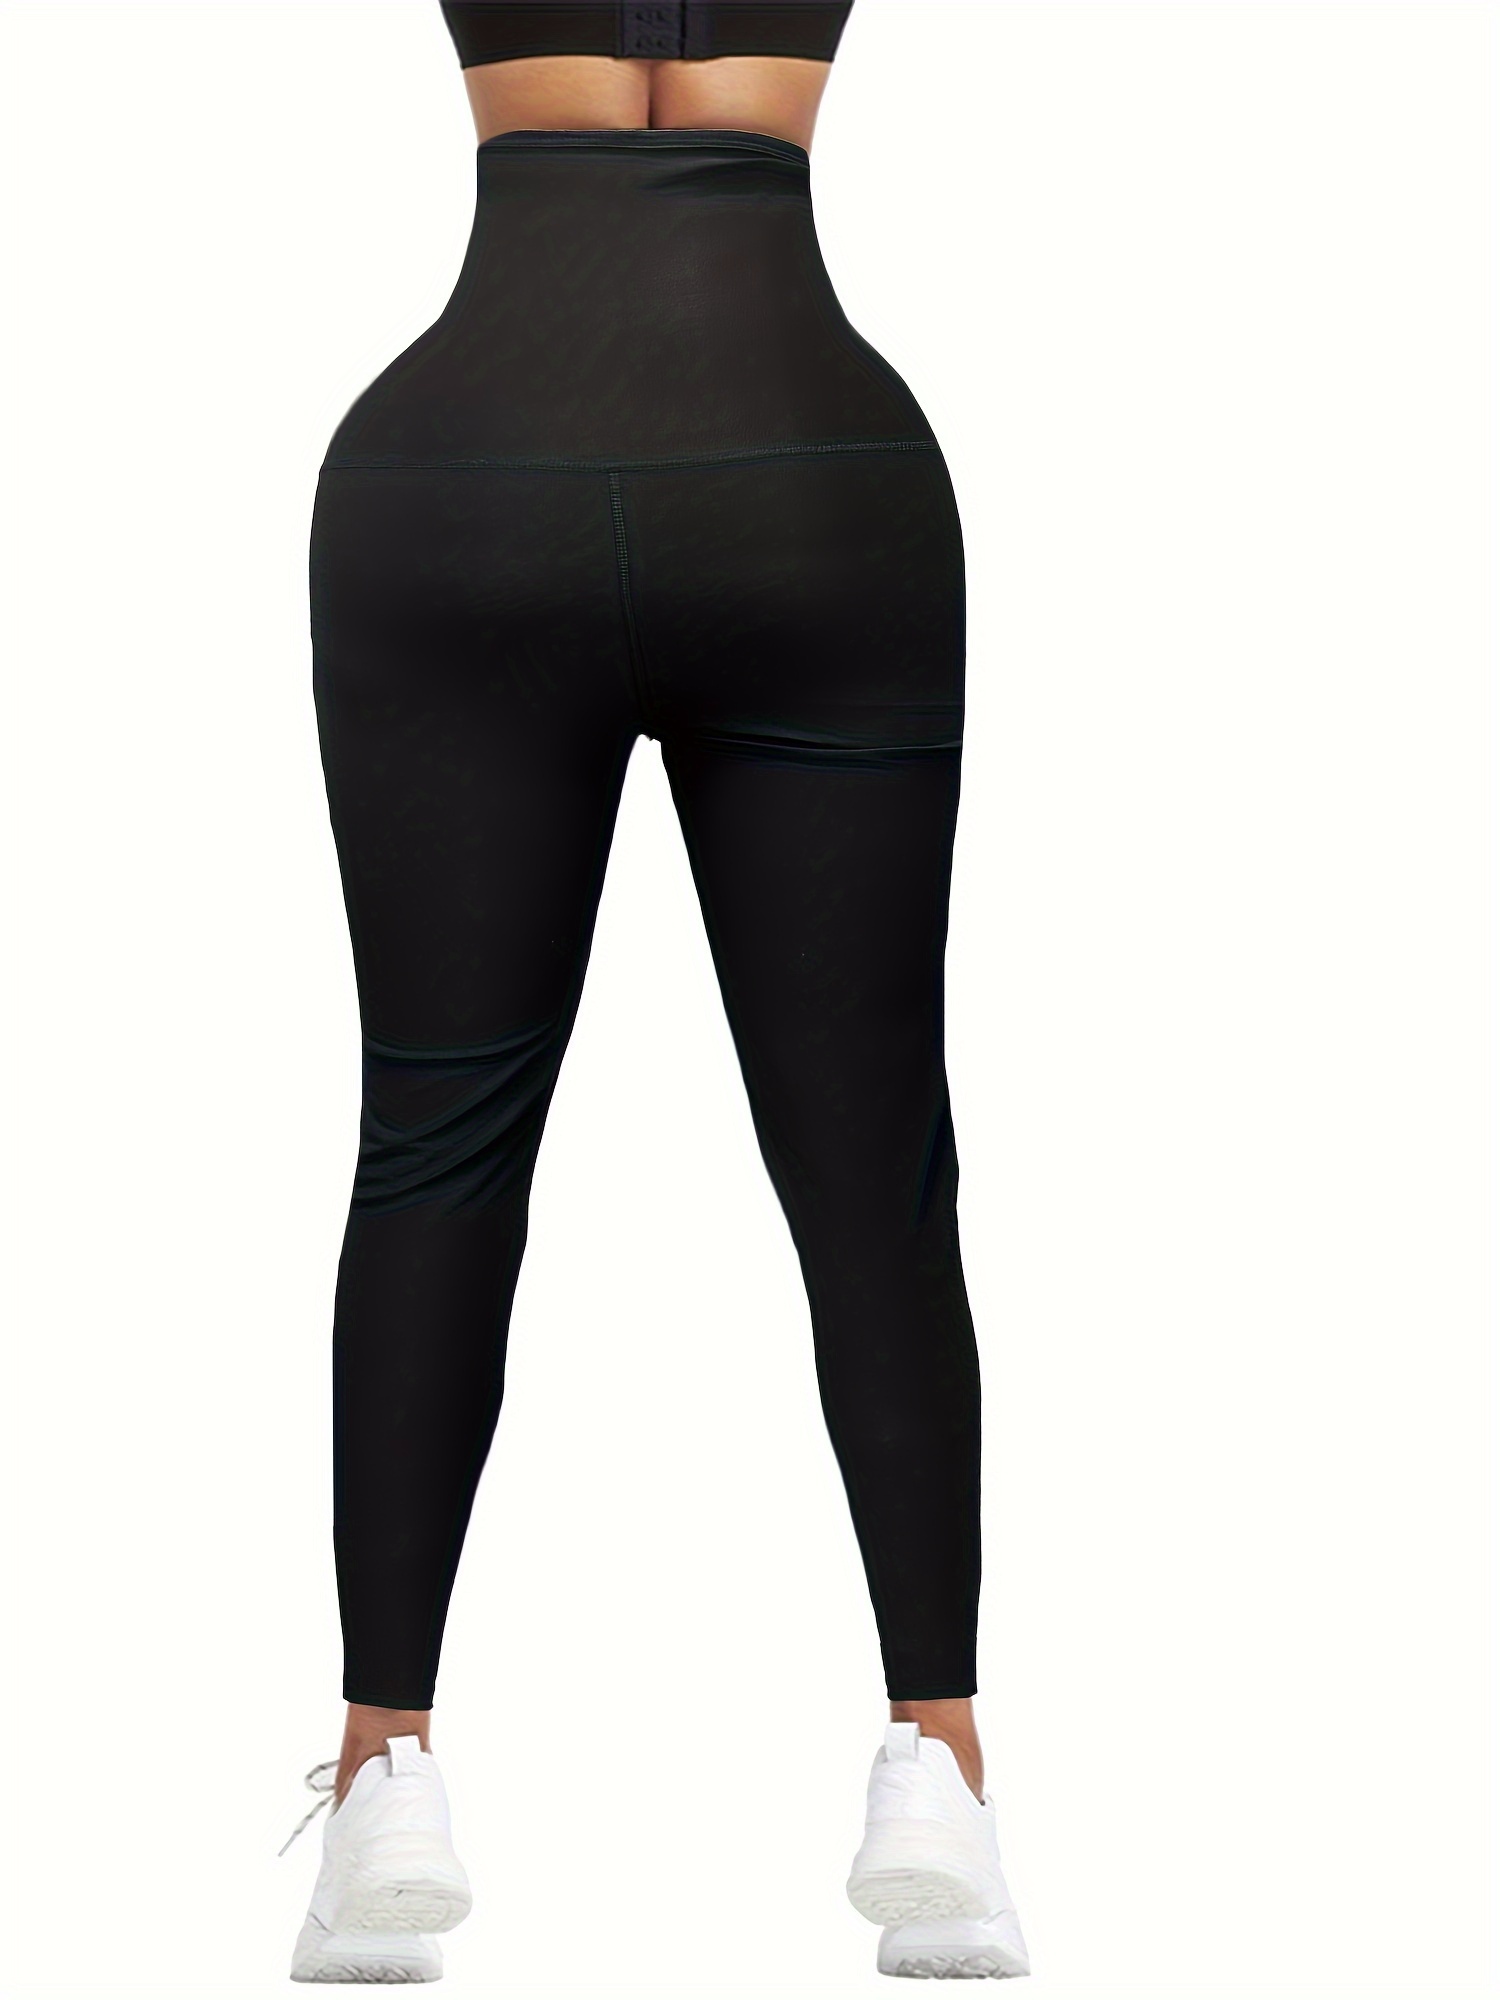 Ausom Womens Thermo Body Shaper Pants Hot Slimming Compression Shapewear  Workout Sweat Sauna Suit Thighs Slim for Weight Loss price in UAE,   UAE